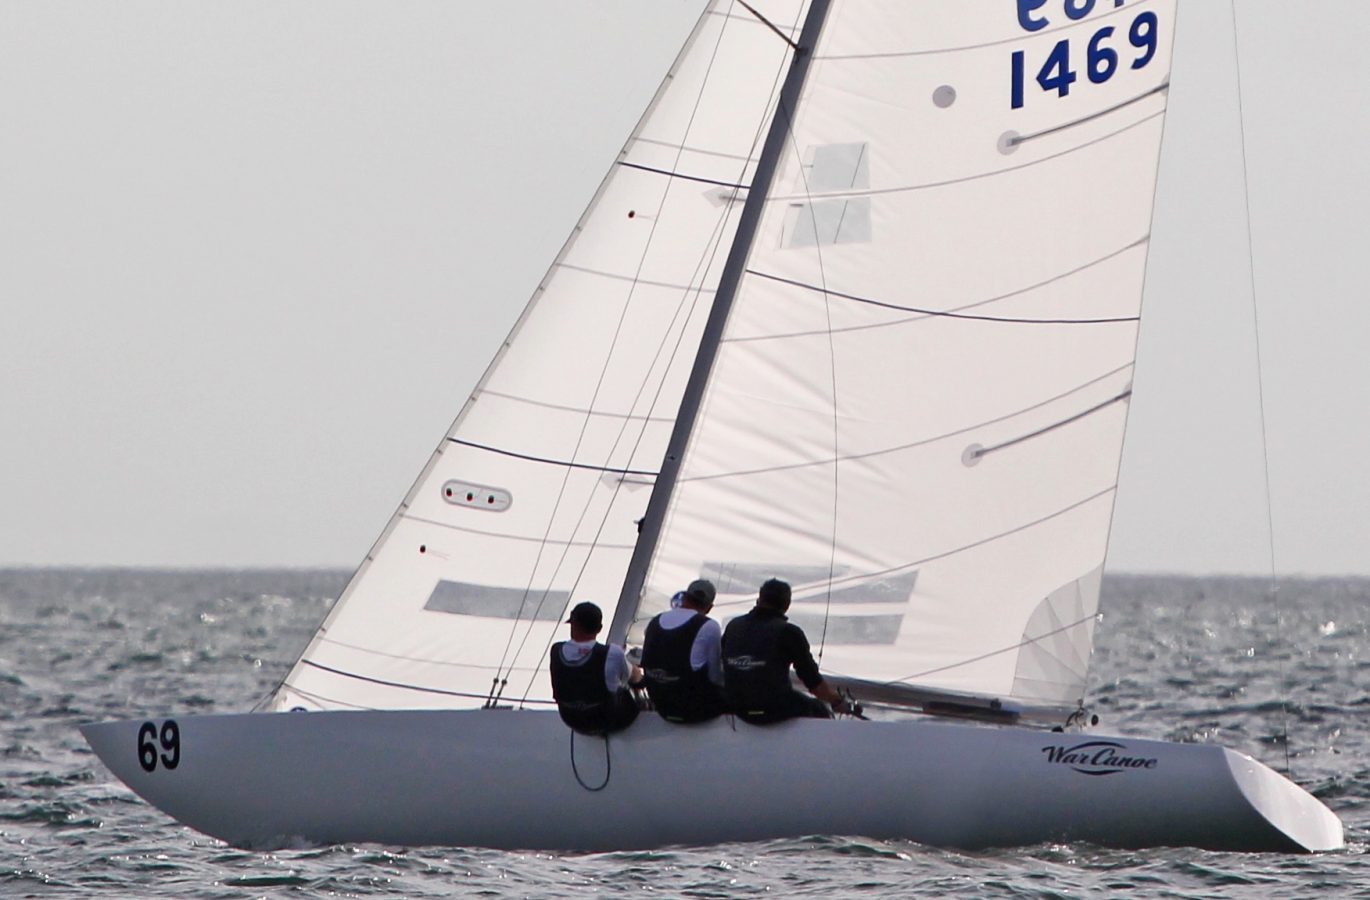 ROAD TO THE ETCHELLS WORLDS - LOUIS PIANA CUP